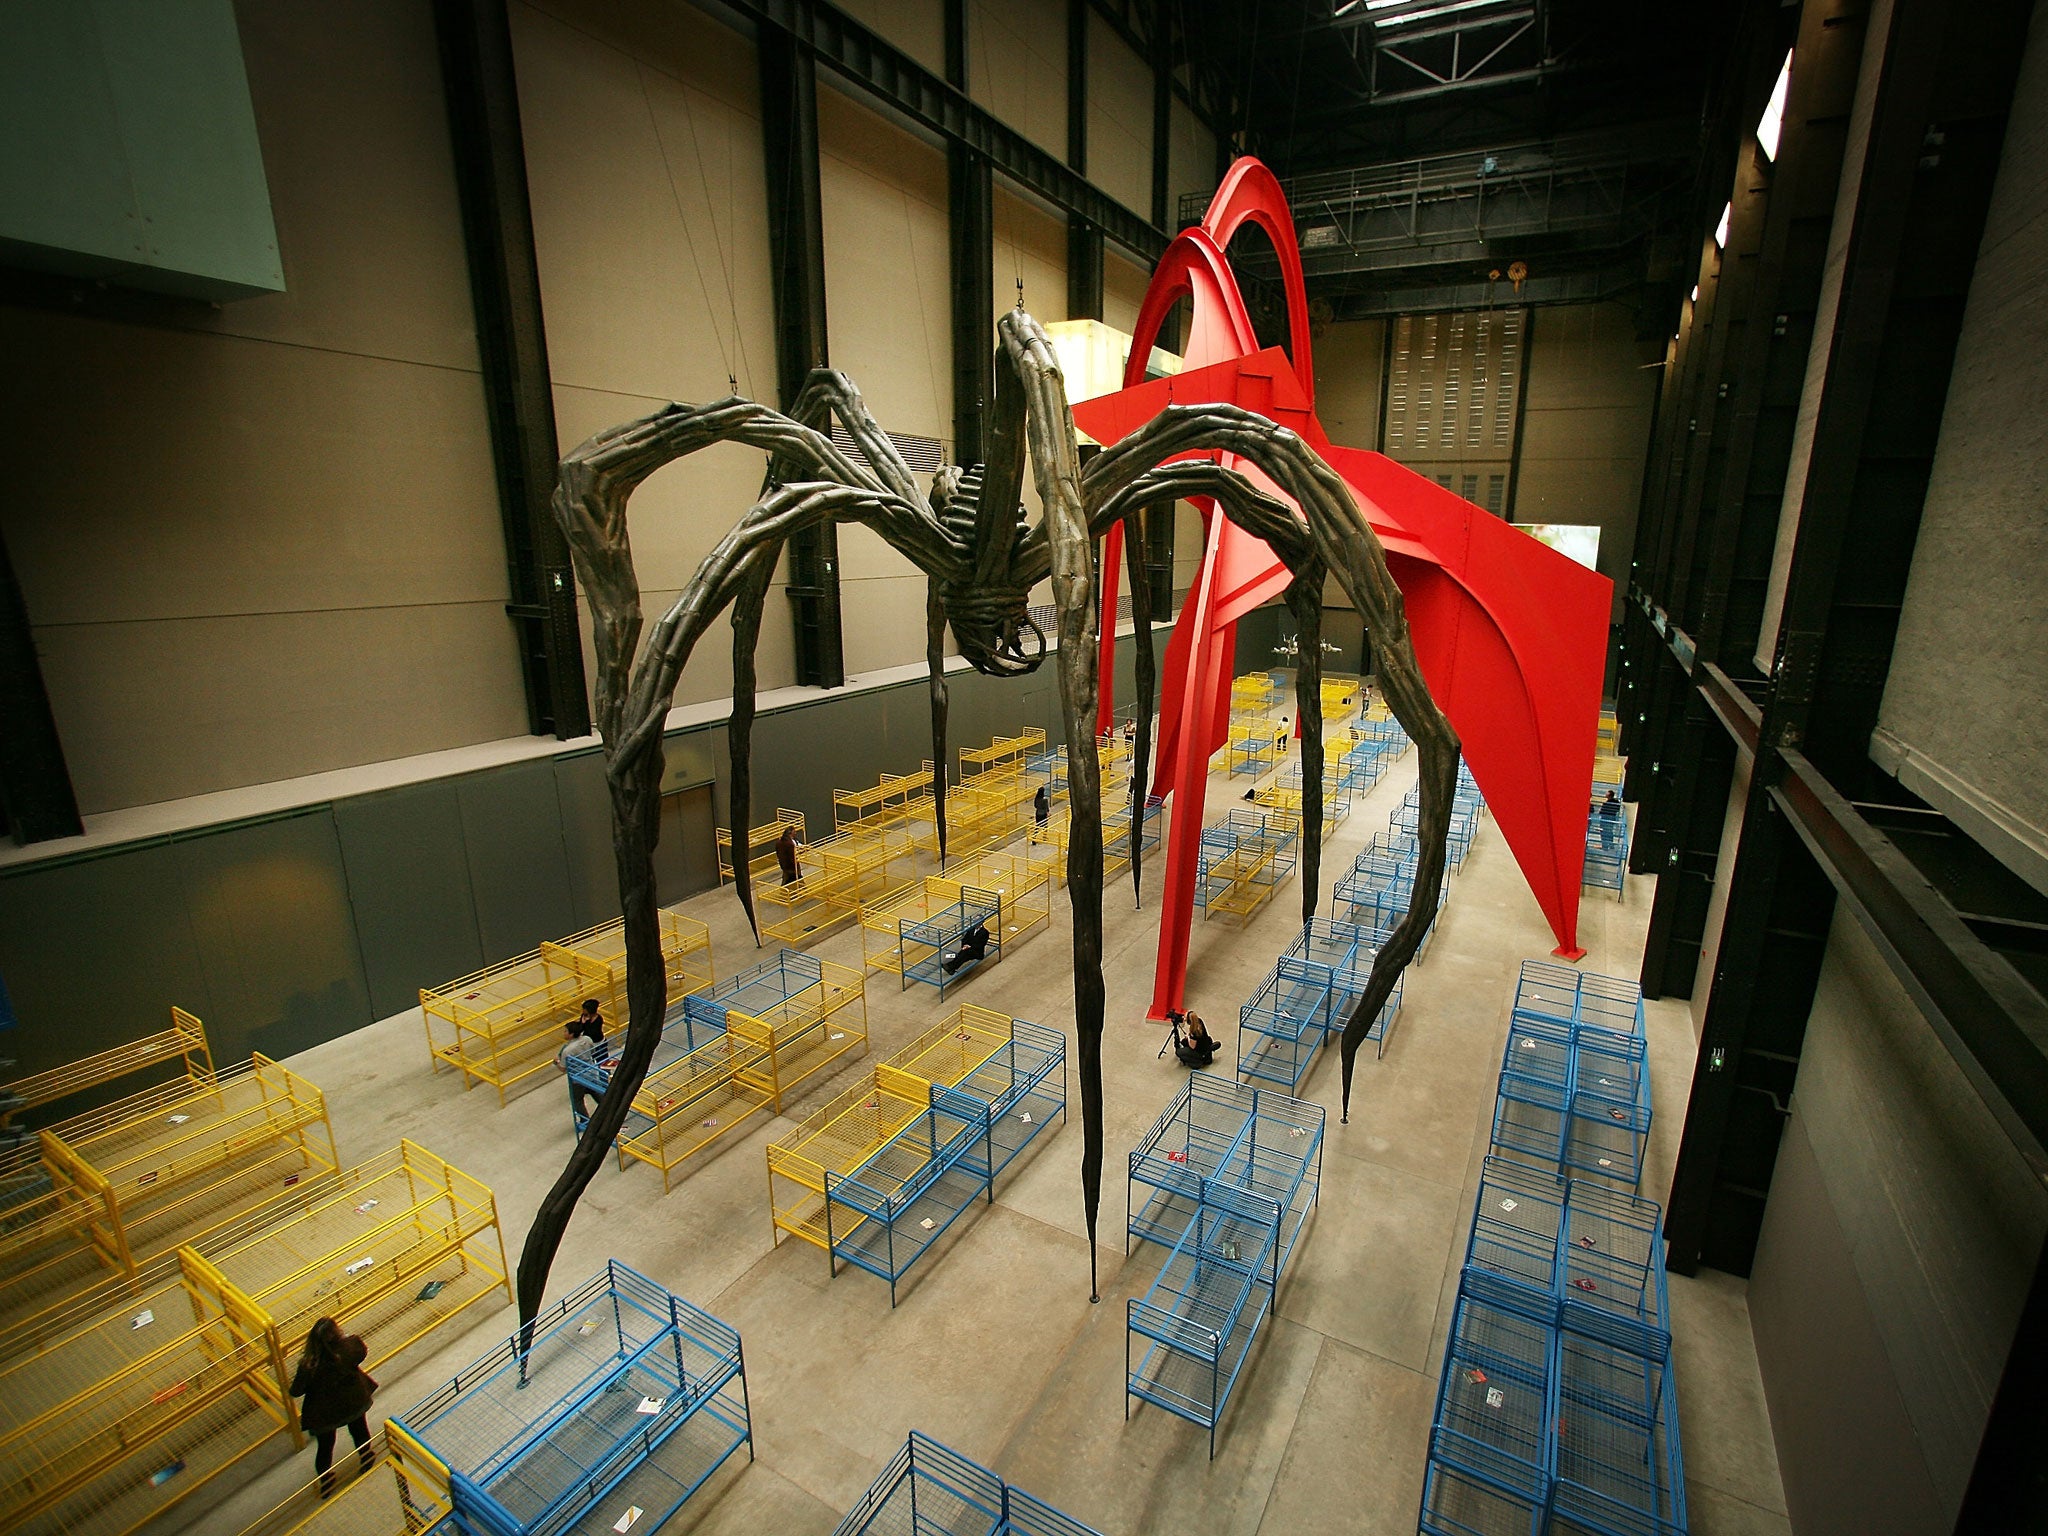 Dominique Gonzalez-Foester's installation 'TH.2058' which opened in October 2008 at the Tate modern